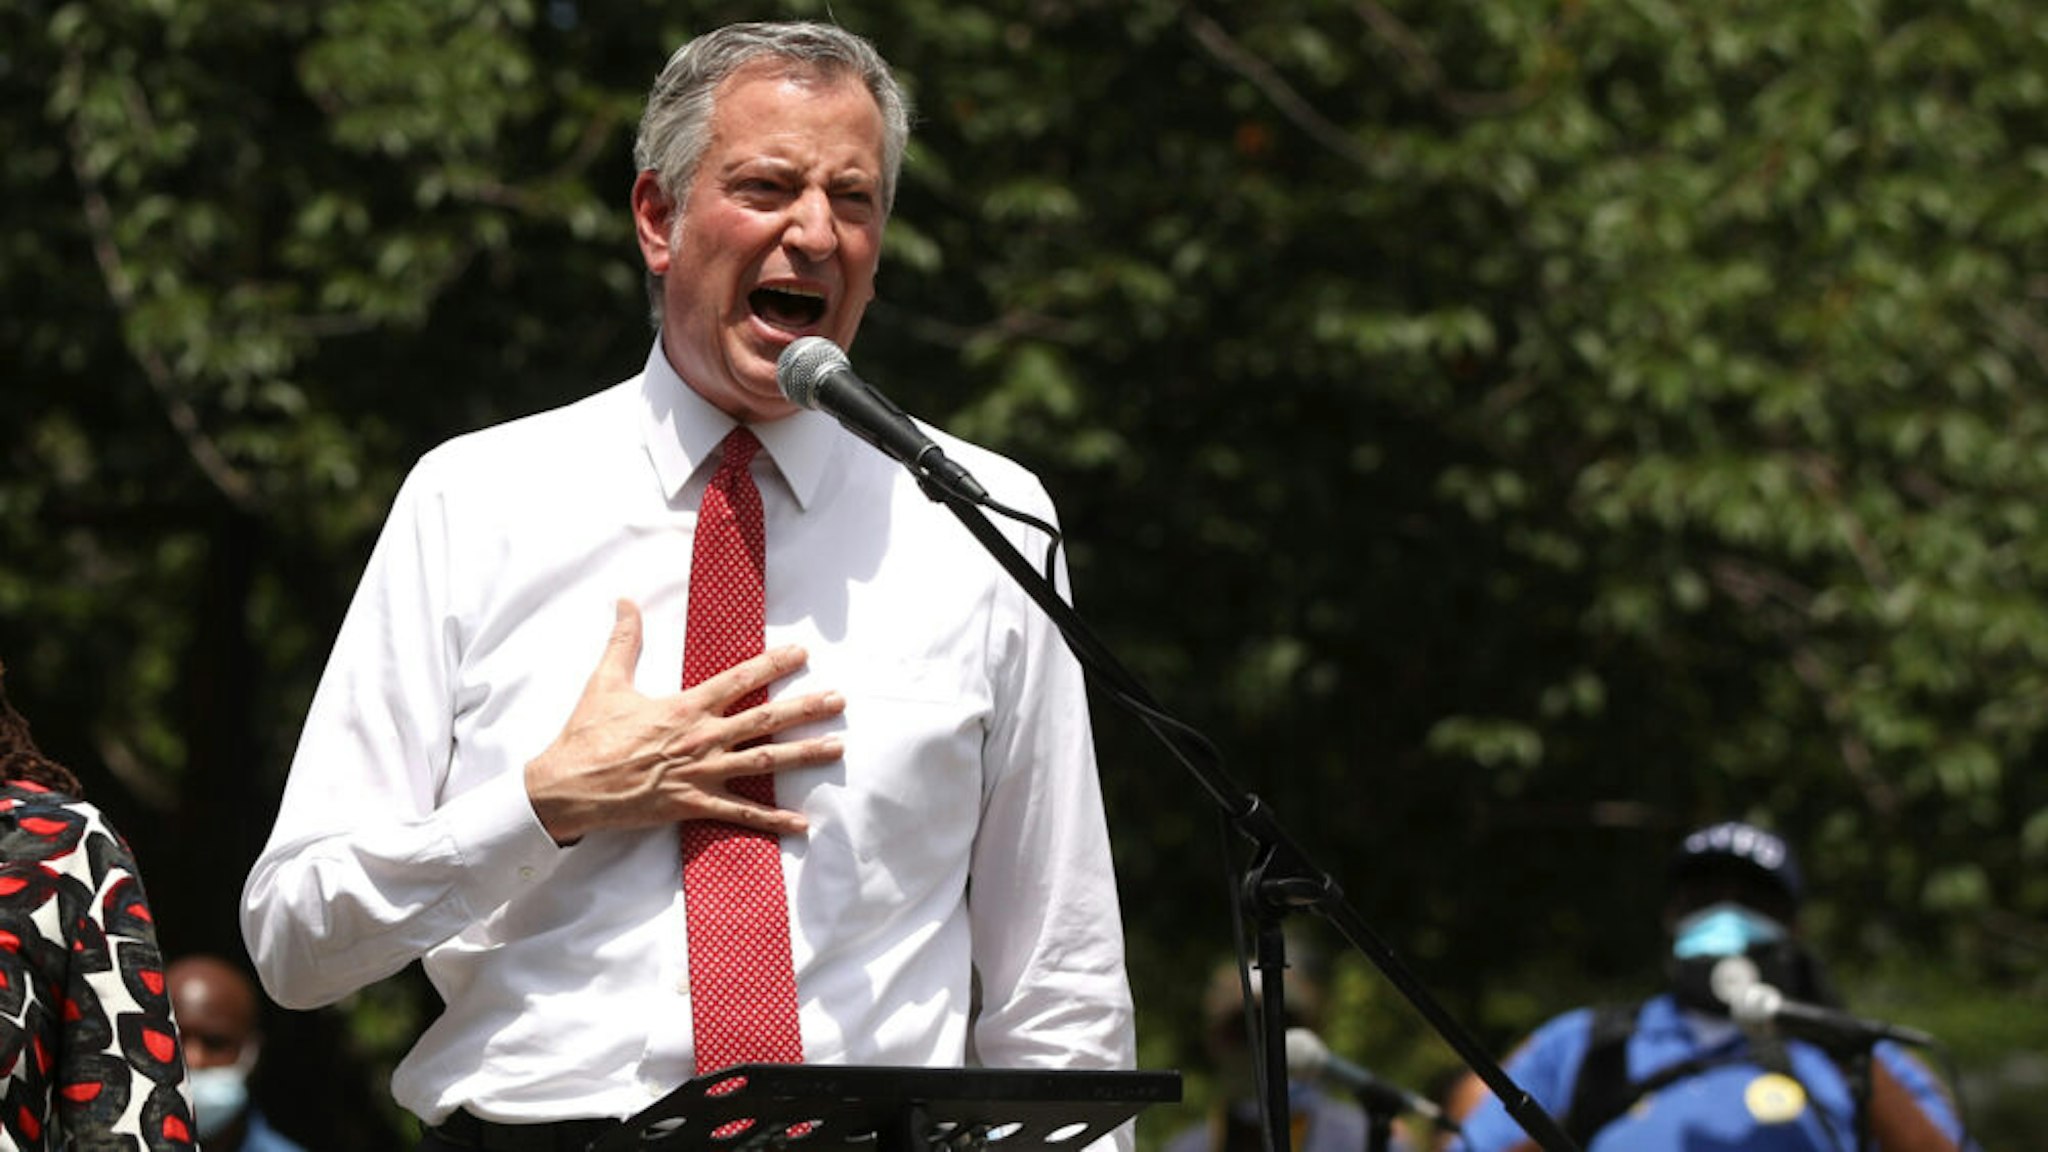 NEW YORK, NEW YORK - JUNE 04: New York Mayor Bill de Blasio speaks to an estimated 10,000 people as they gather in Brooklyn’s Cadman Plaza Park for a memorial service for George Floyd, the man killed by a Minneapolis police officer on June 04, 2020 in New York City. Floyd’s brother, Terrence, local politicians and civic and religious leaders also attended the event before marching over the Brooklyn Bridge.